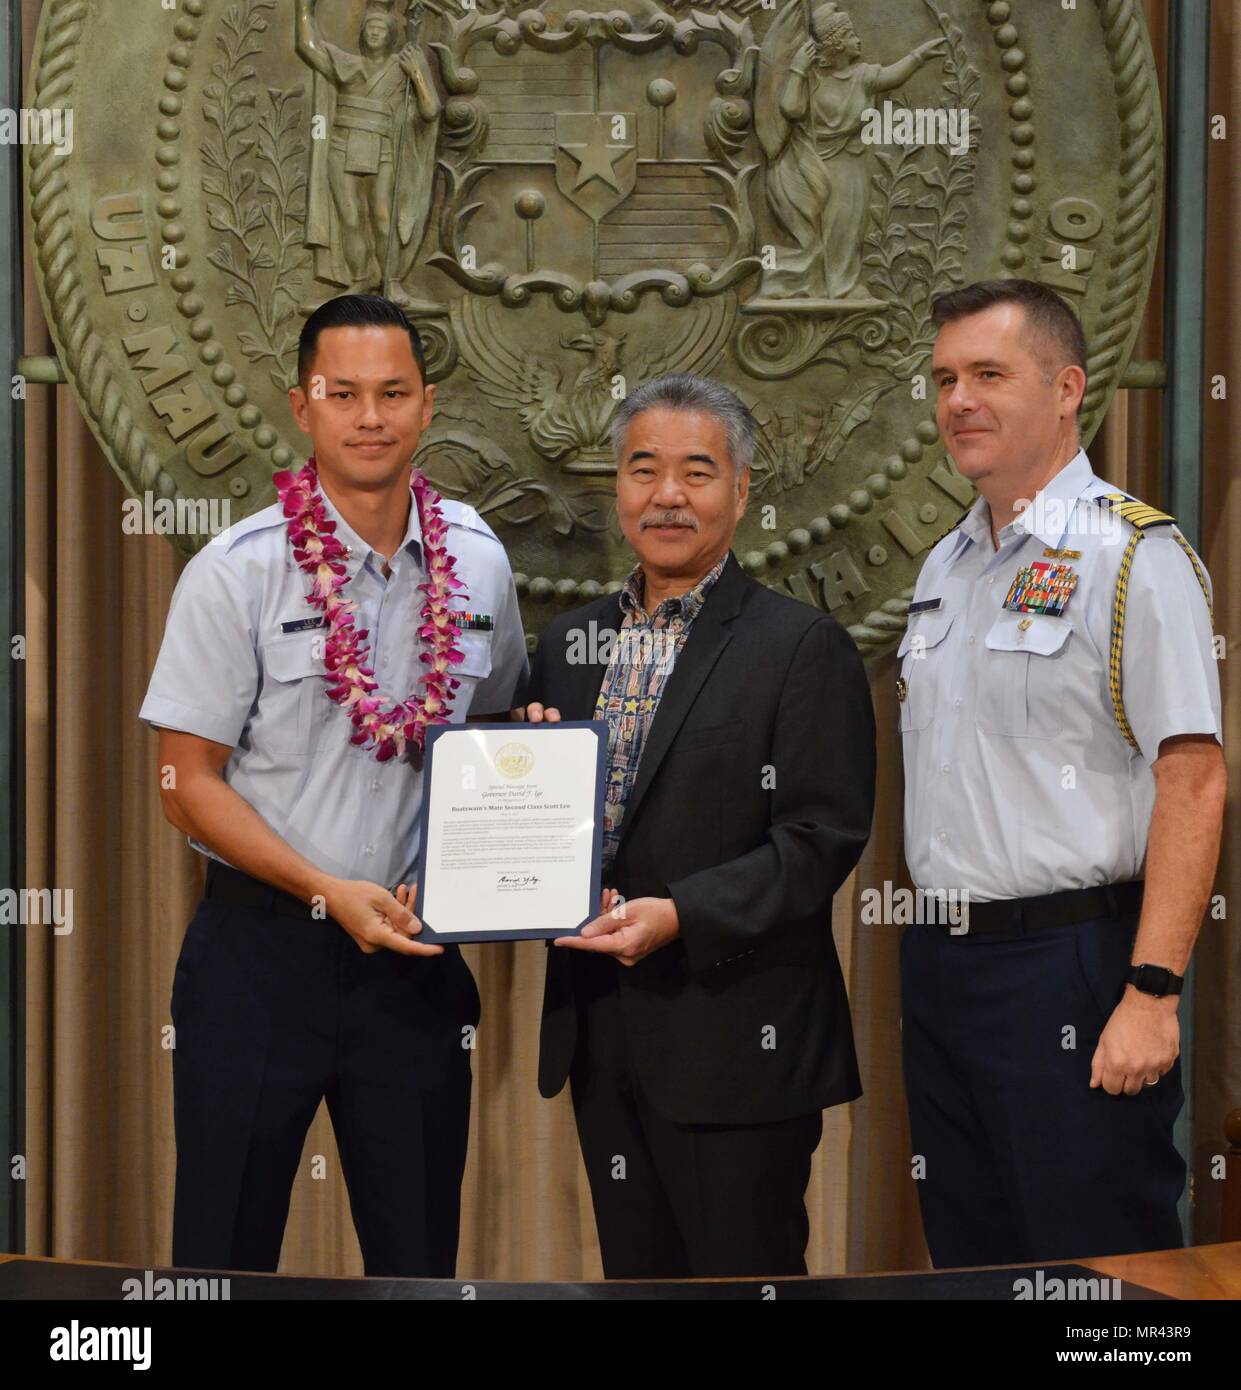 Petty Officer 2nd Class Scott Lee, a boatswain’s mate stationed at Coast Guard Station Honolulu, was recognized for his outstanding community service by Hawaii State Governor David Y. Ige and Capt. Brian Penoyer, Coast Guard Fourteenth District chief of staff, at the Hawaii State Capitol, May 5, 2017. The Military Affairs Council of the Chamber of Commerce Hawaii joined Governor Ige in a proclamation ceremony designating May as Military Appreciation Month and honoring service members from all five branches of the armed forces for their community service contributions. (U.S. Coast Guard photo b Stock Photo